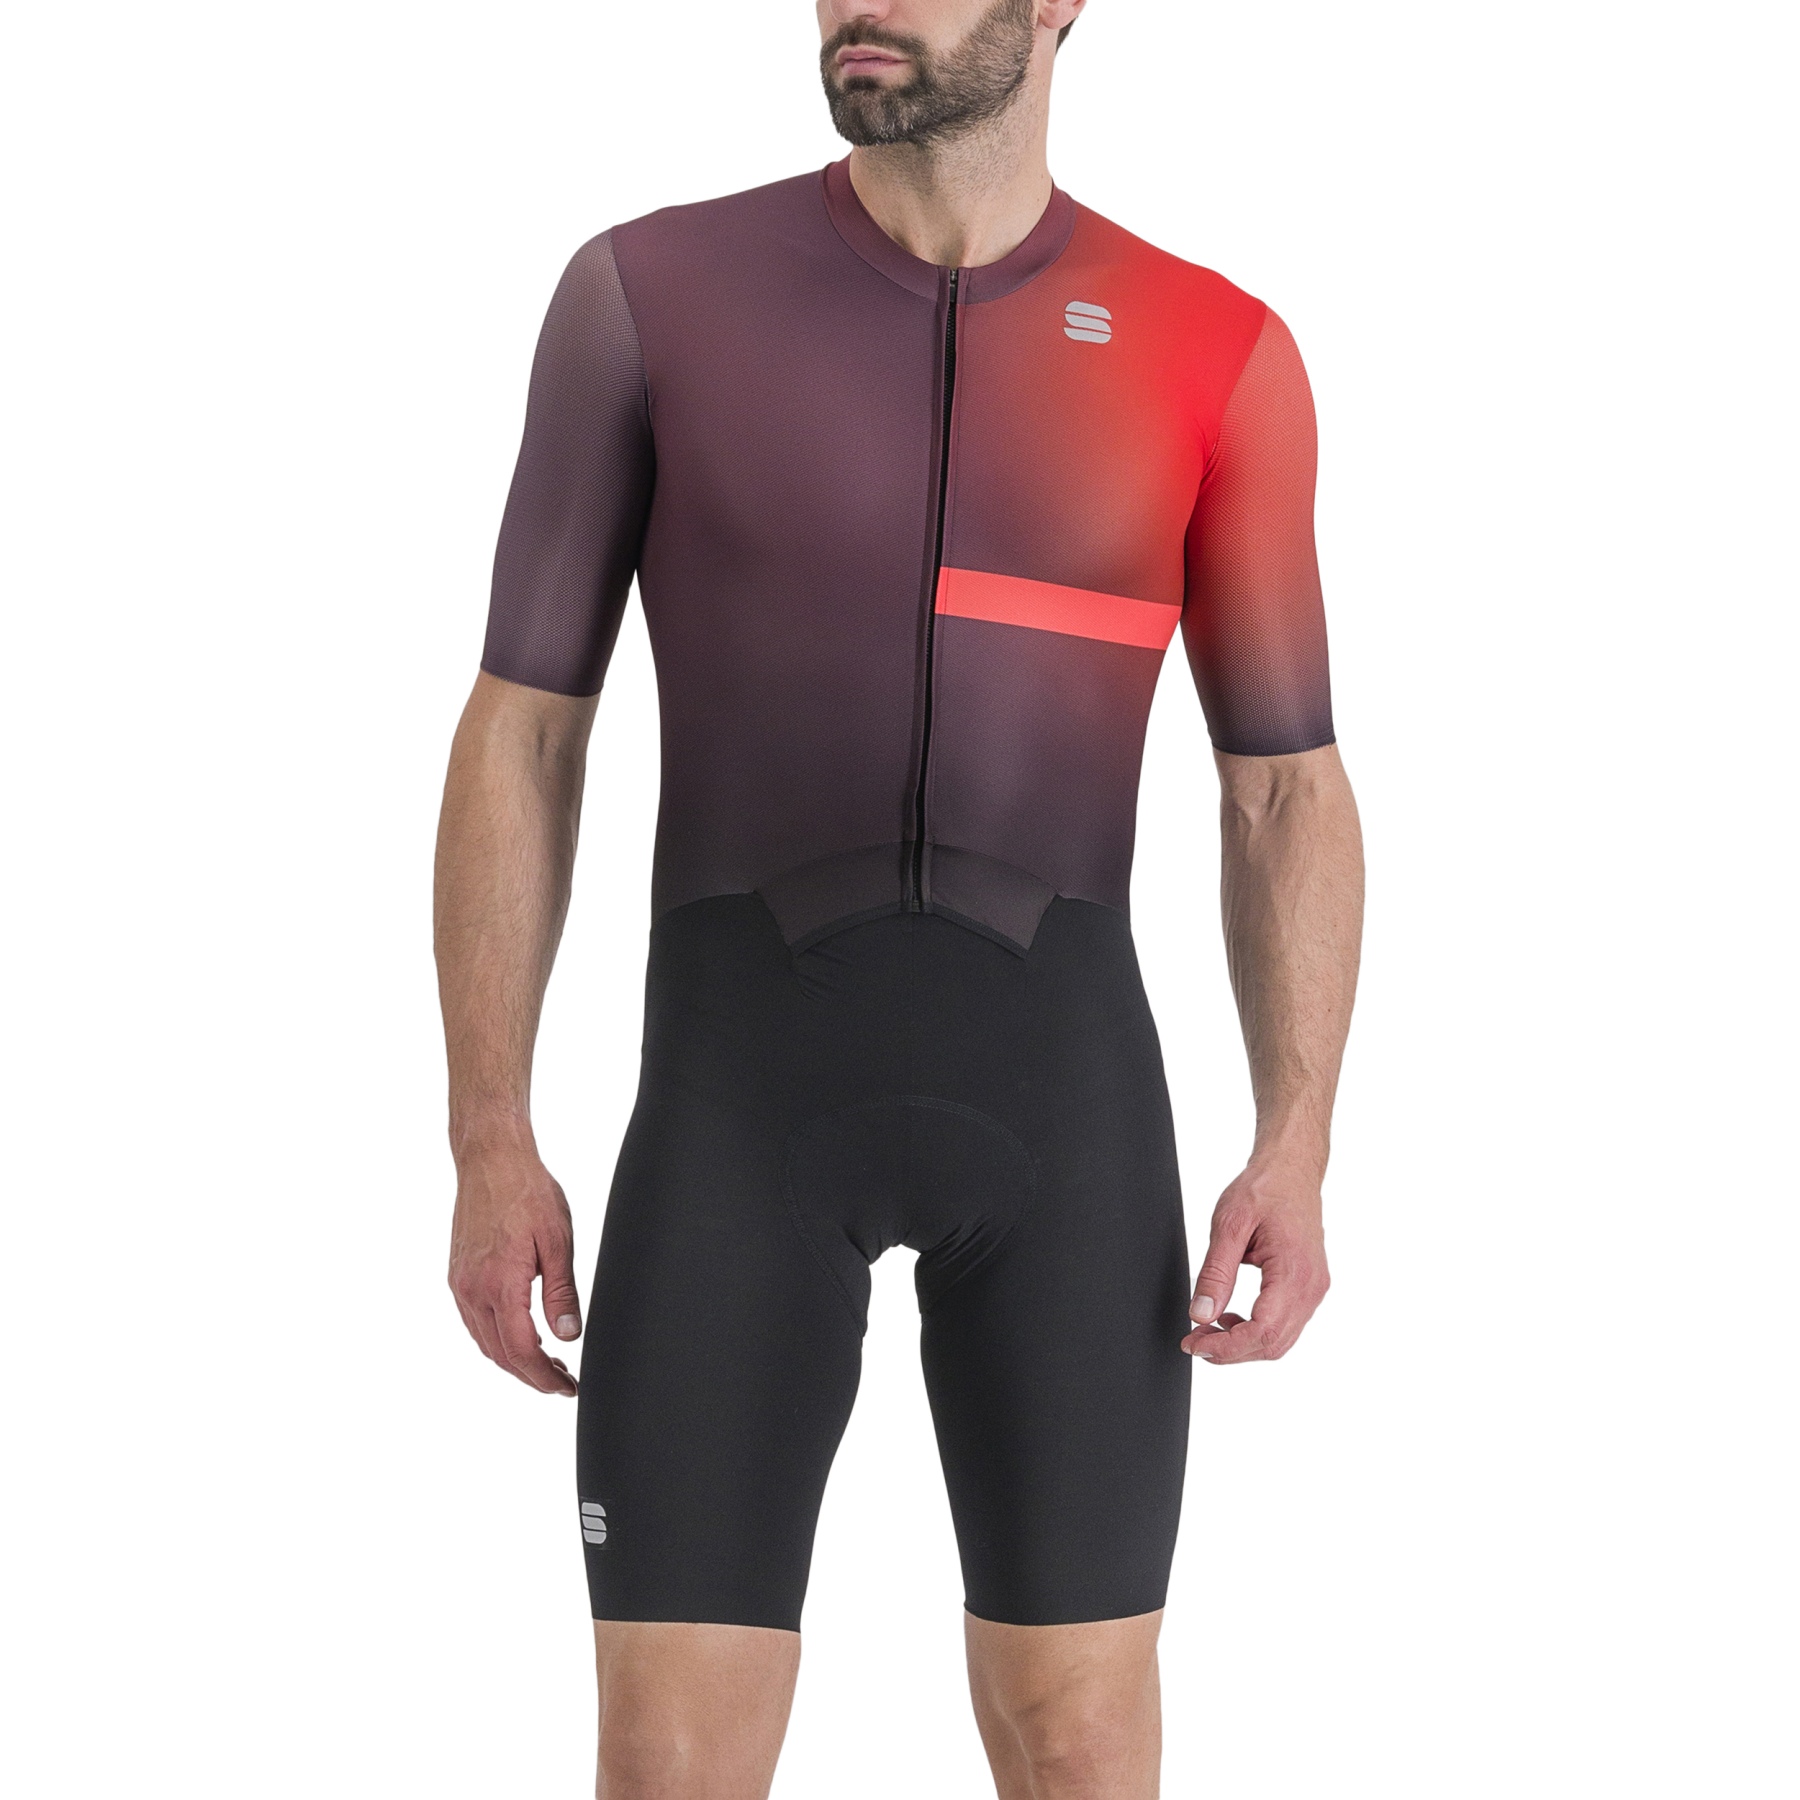 Picture of Sportful Bomber Race Suit - 623 Black/Huckleberry